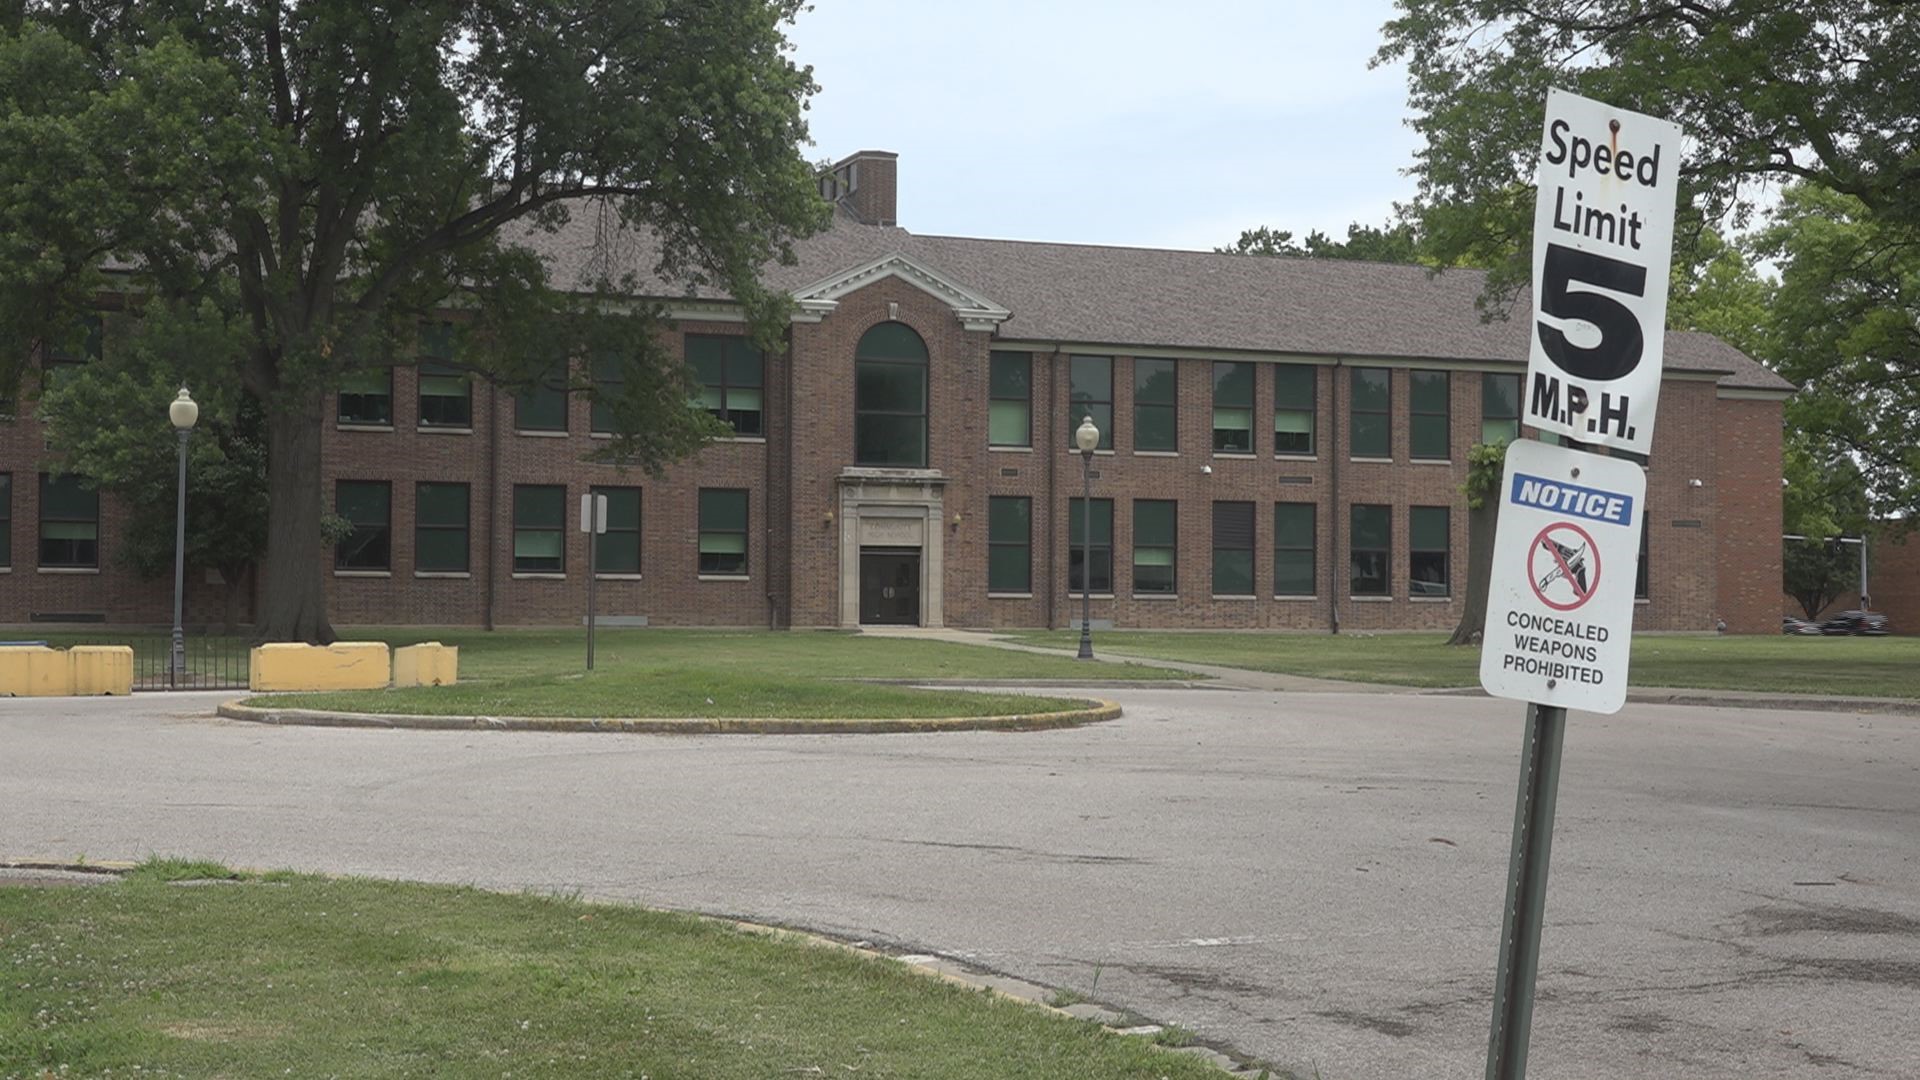 In 2018, investigators cleared former Granite City teacher Andrew Crider of any wrongdoing since the student was 18 at the time of the incident.